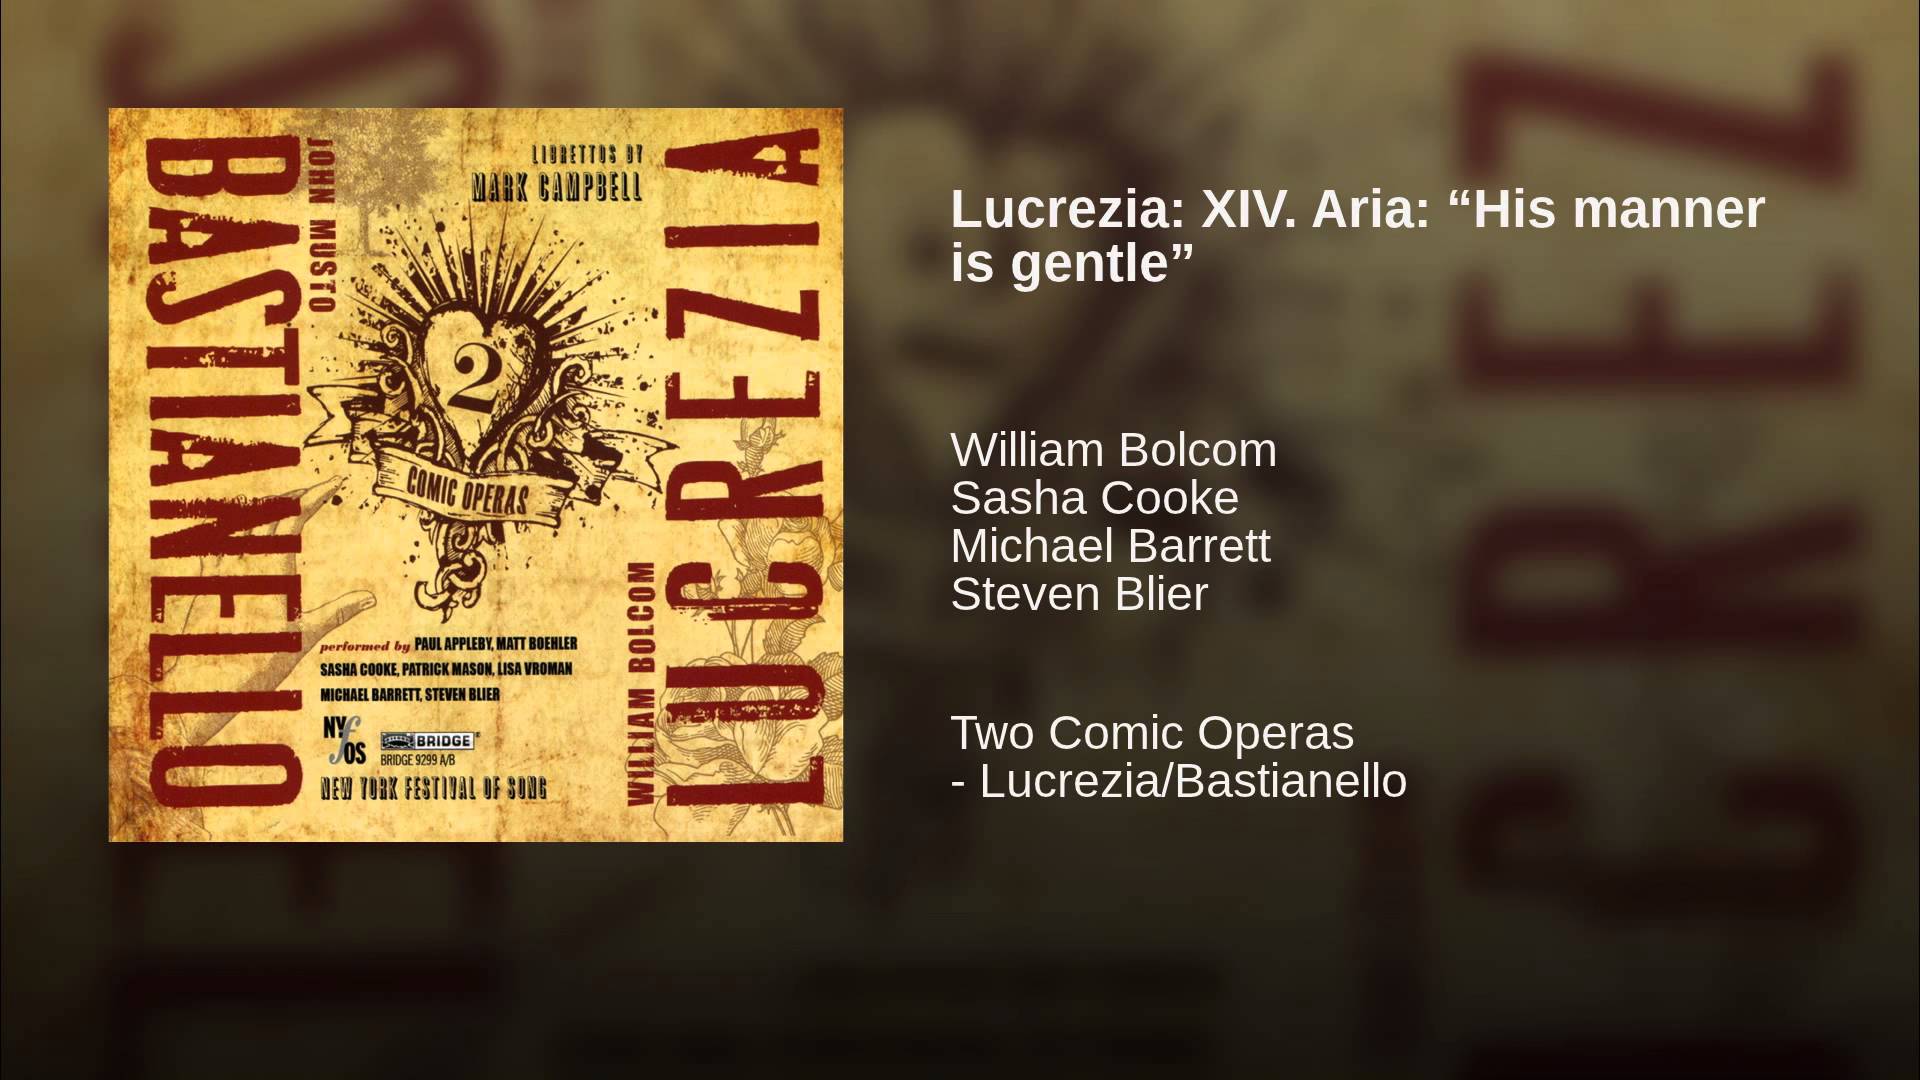 William Bolcom:  His Manner is Gentle (from “Lucrezia”)